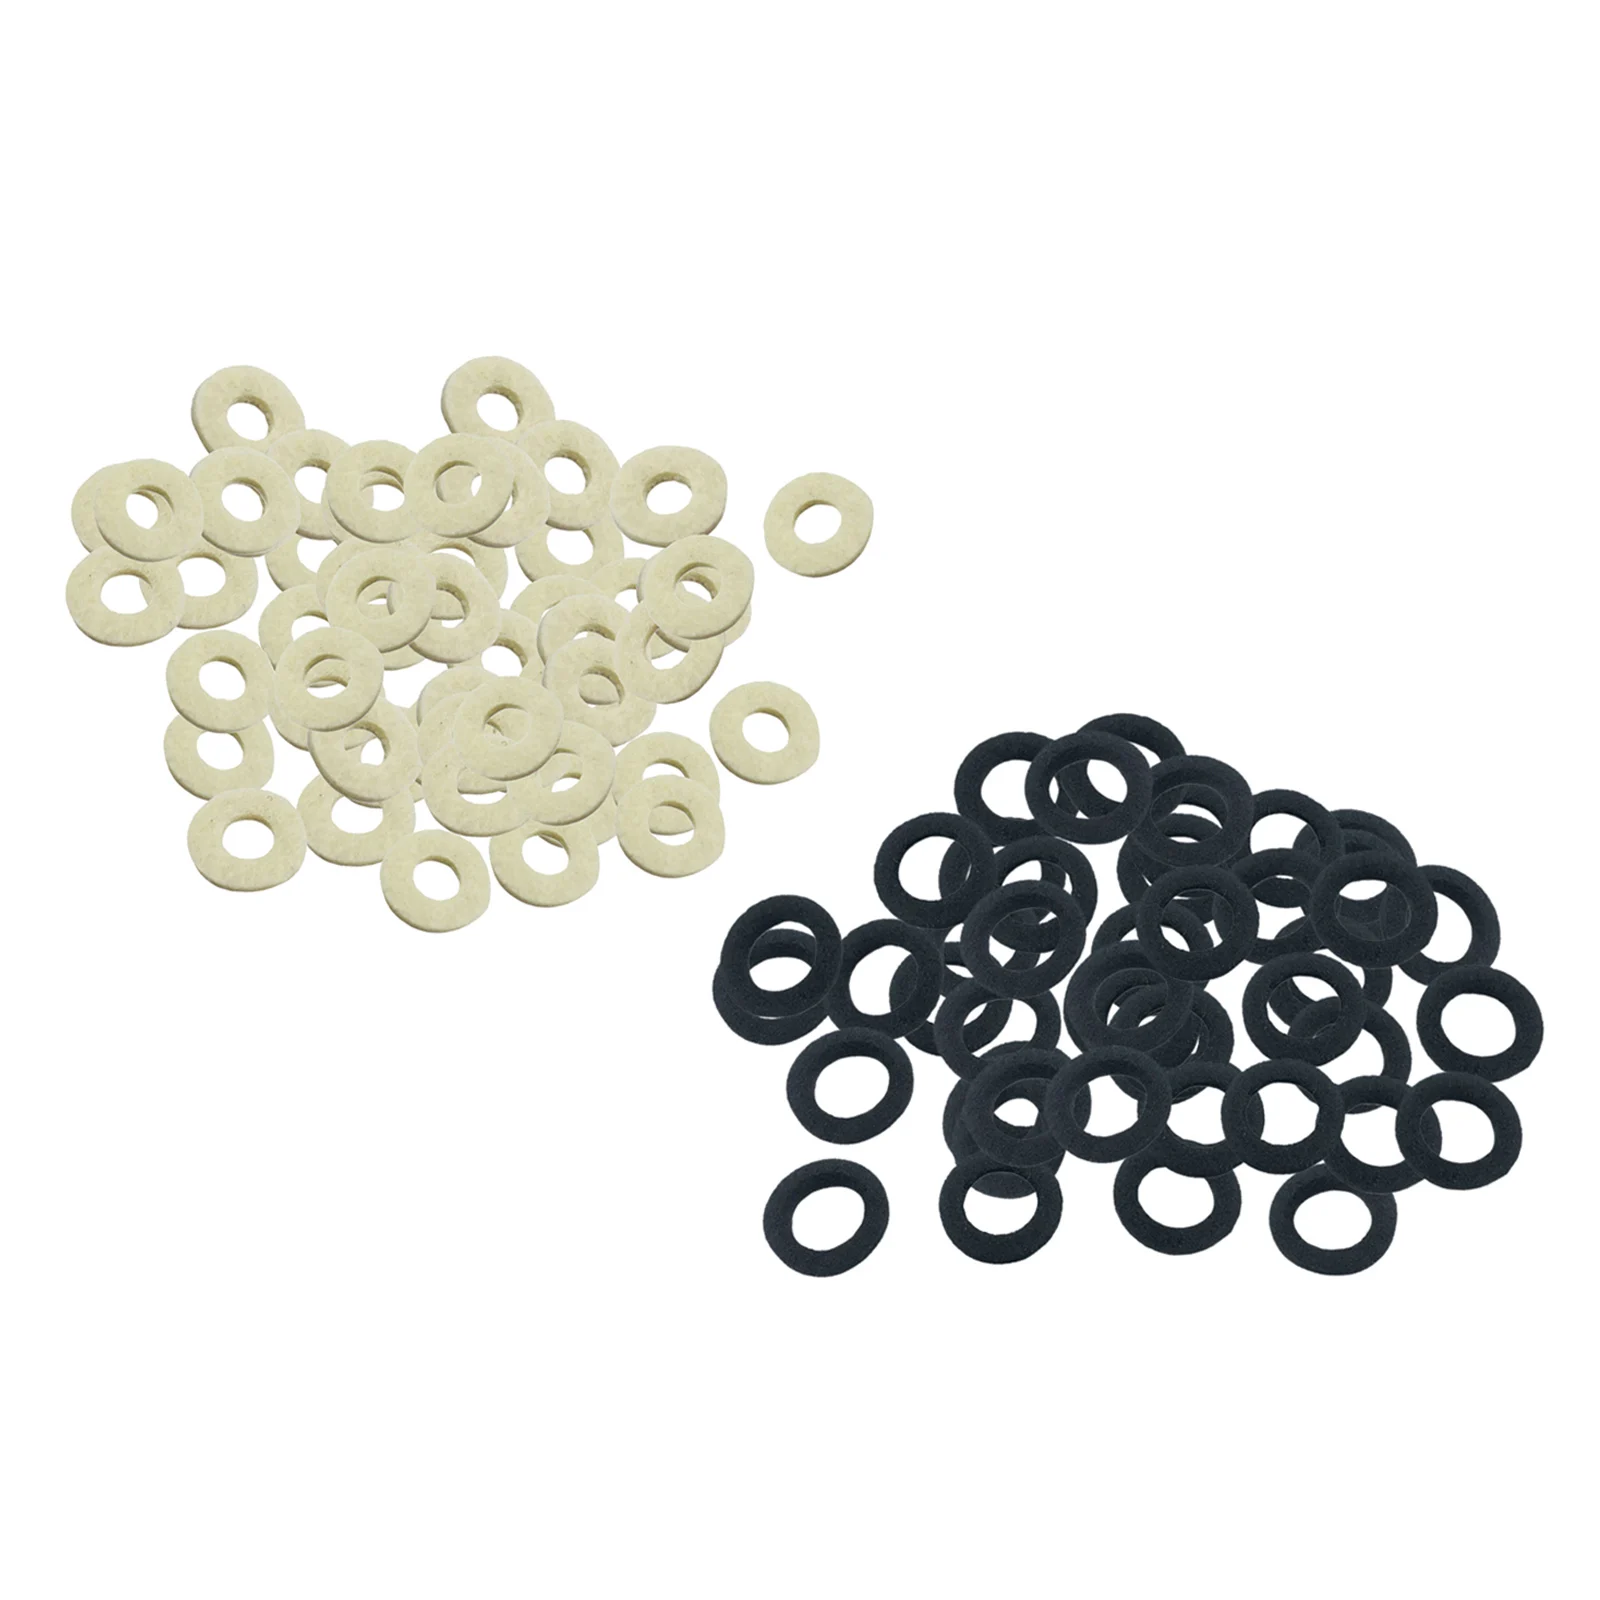 50x Cornet Trumpet Valve Felt Washers, Trumpet Washers Pad, Musical Instrument Parts Accessories Replacement Durable